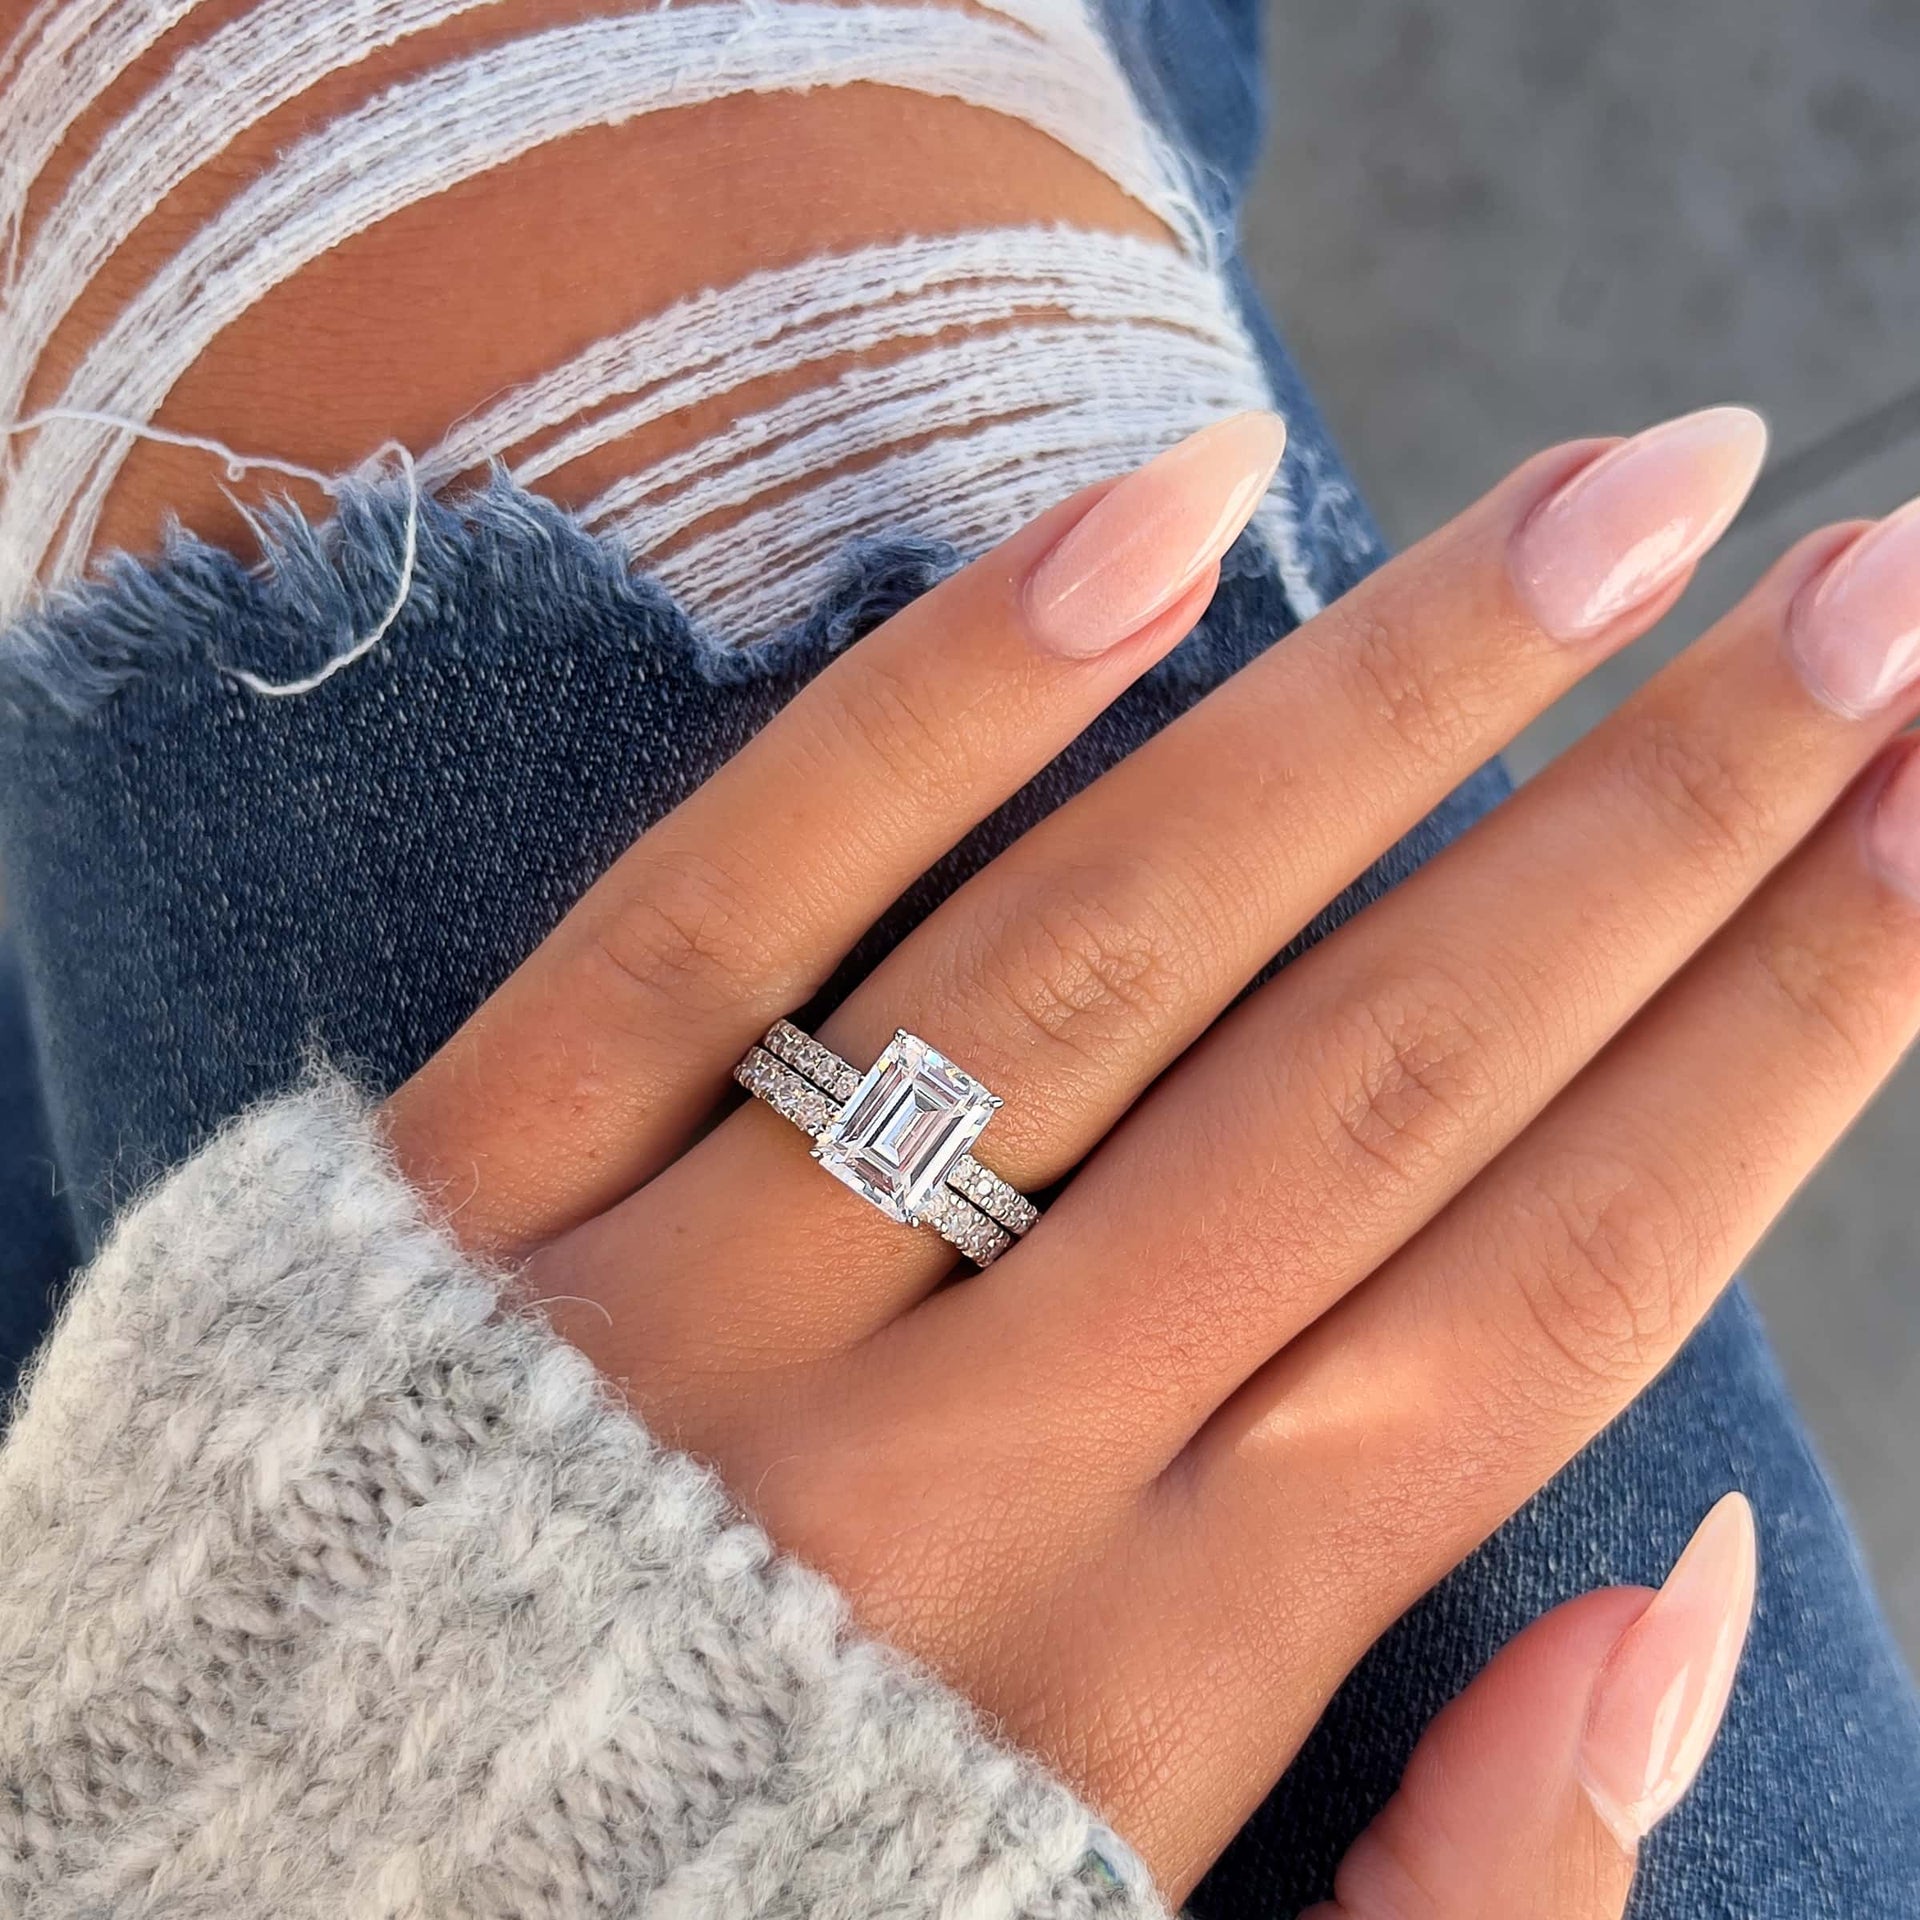 stunning 3 carat emerald cut engagement ring paired with wedding band on female hand resting on blue jeans